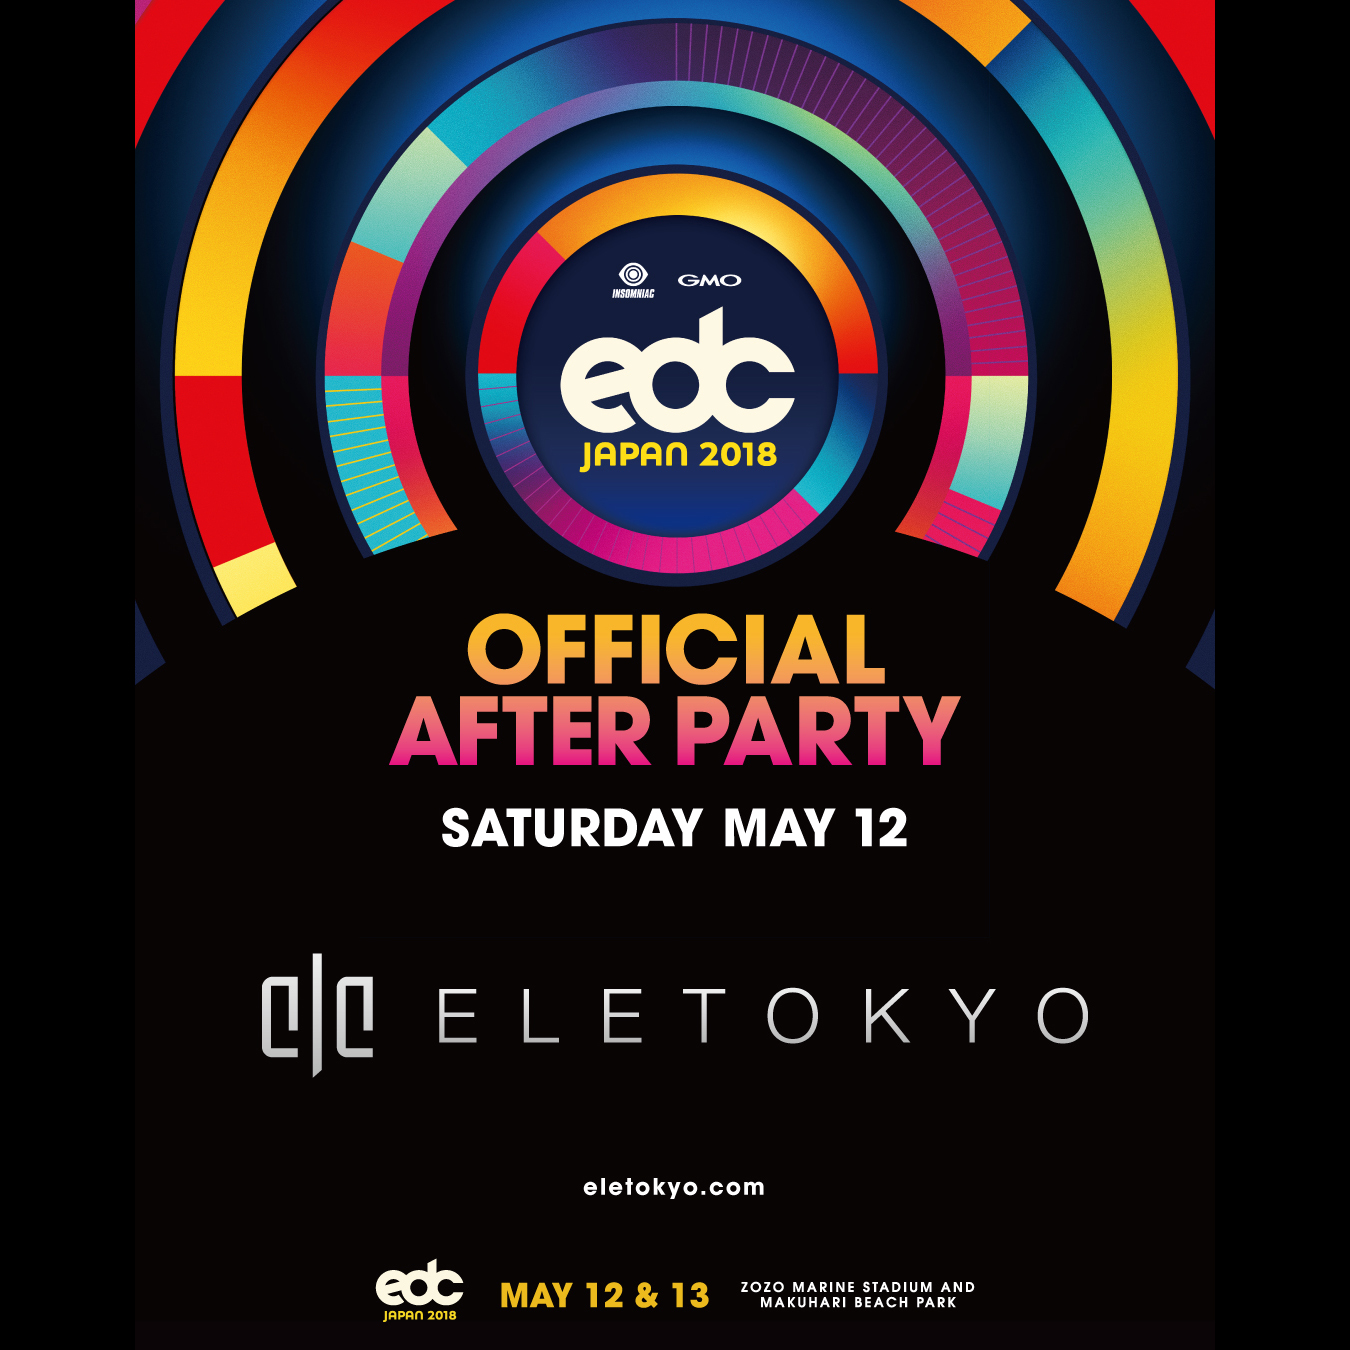 EDC JAPAN OFFICIAL AFTER PARTY